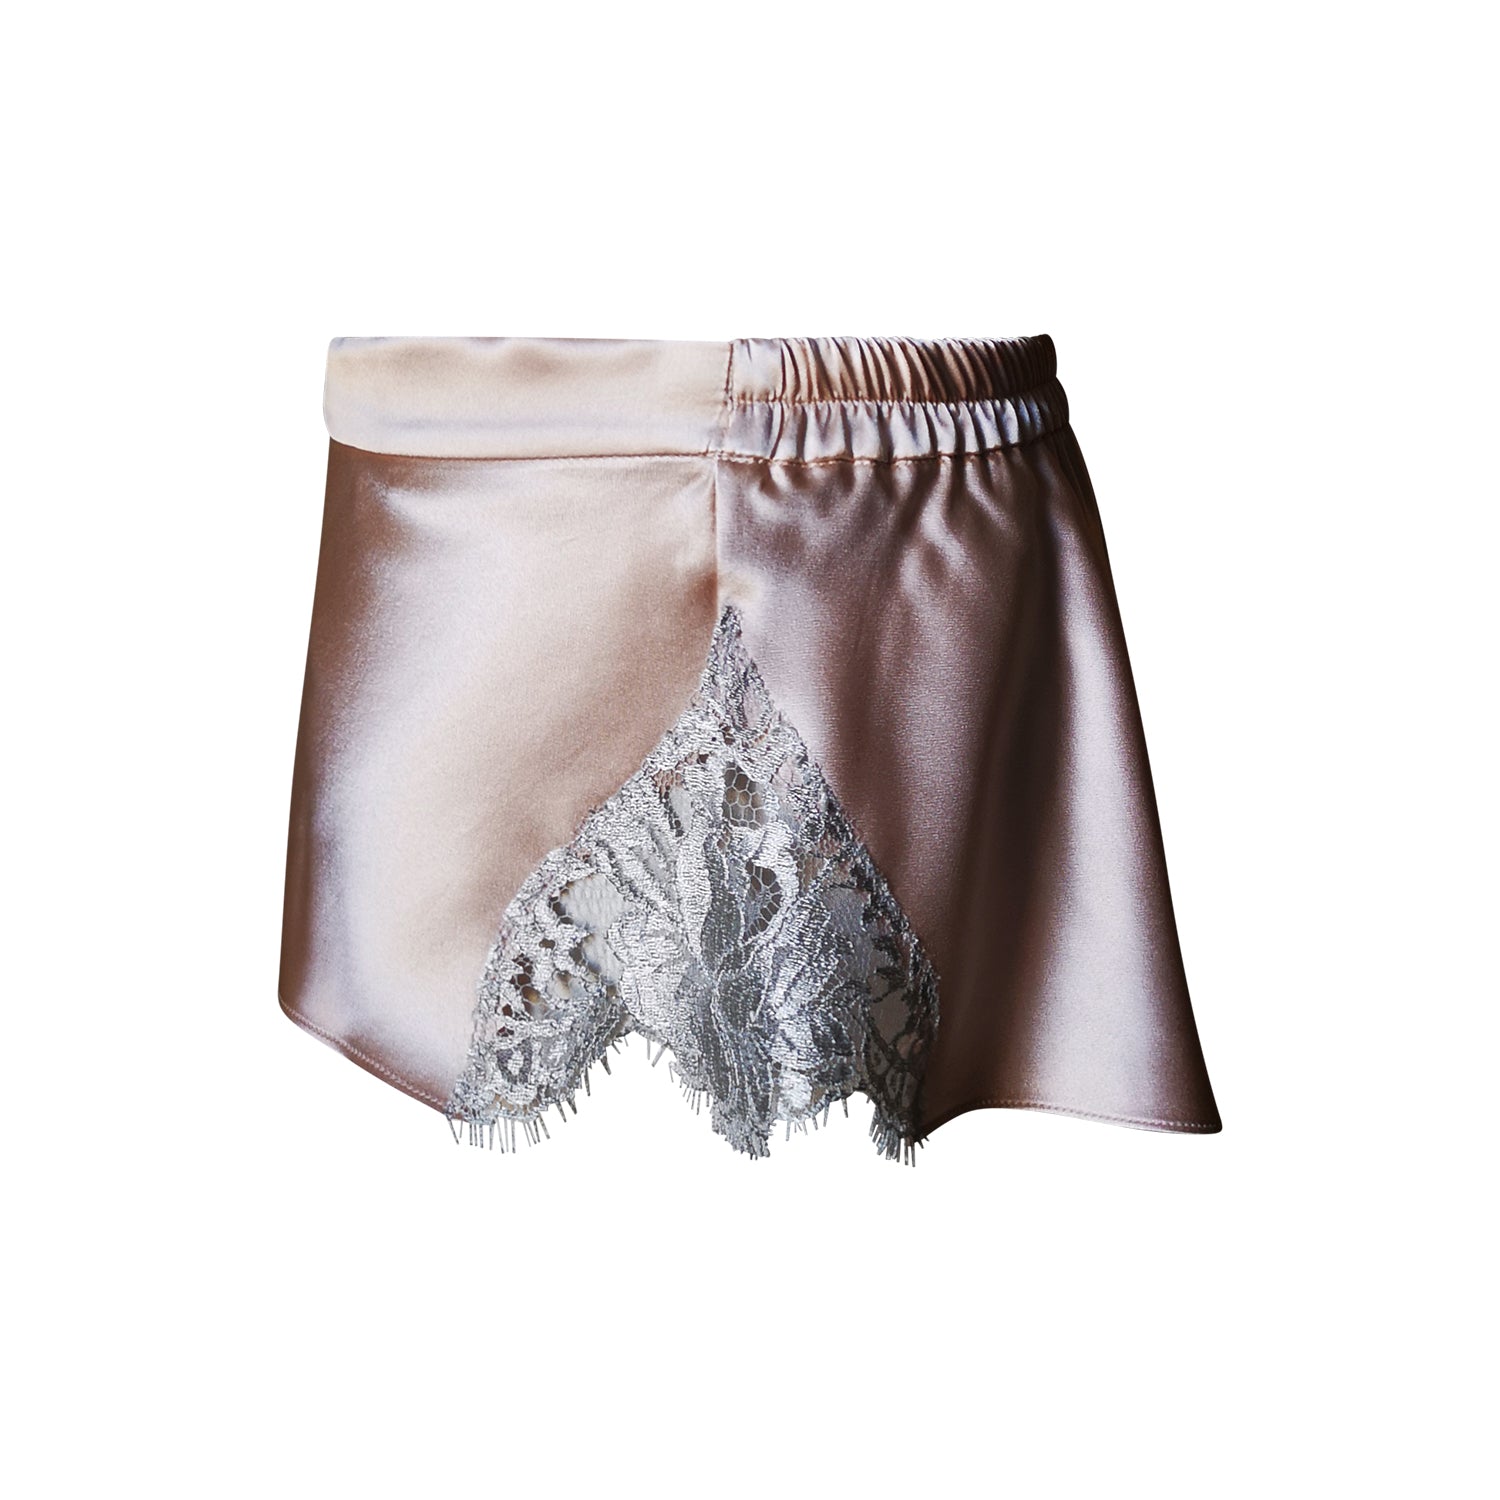 Silk French knickers with French lace - Nude w/ Platinum Lace – Natalie Begg